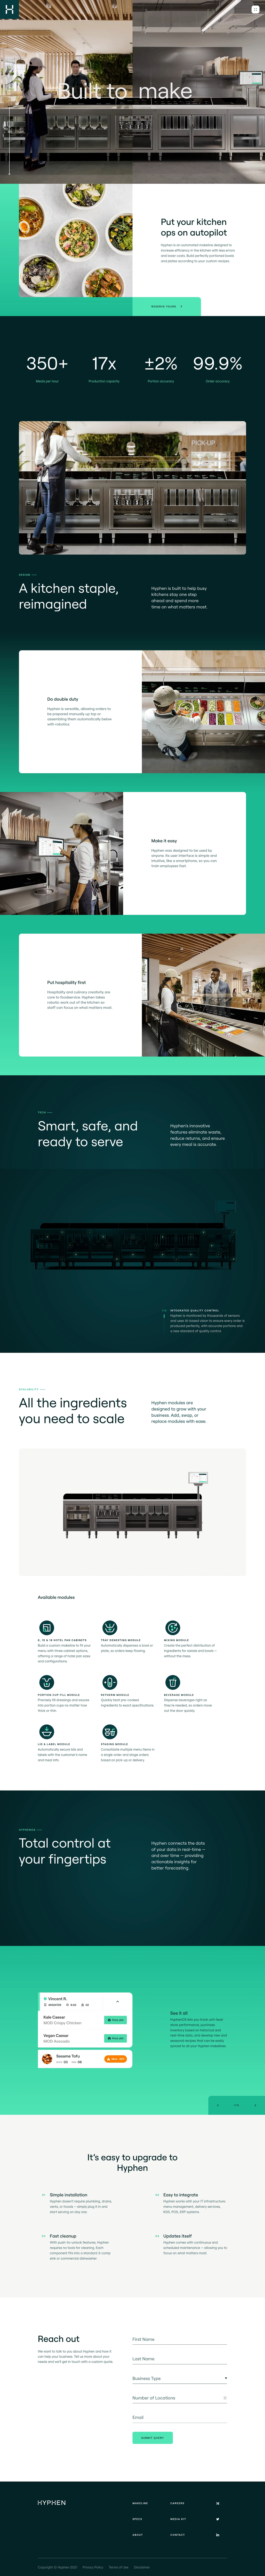 Hyphen Landing Page Example: Hyphen is an automated makeline designed to increase efficiency in the kitchen with less errors and lower costs.